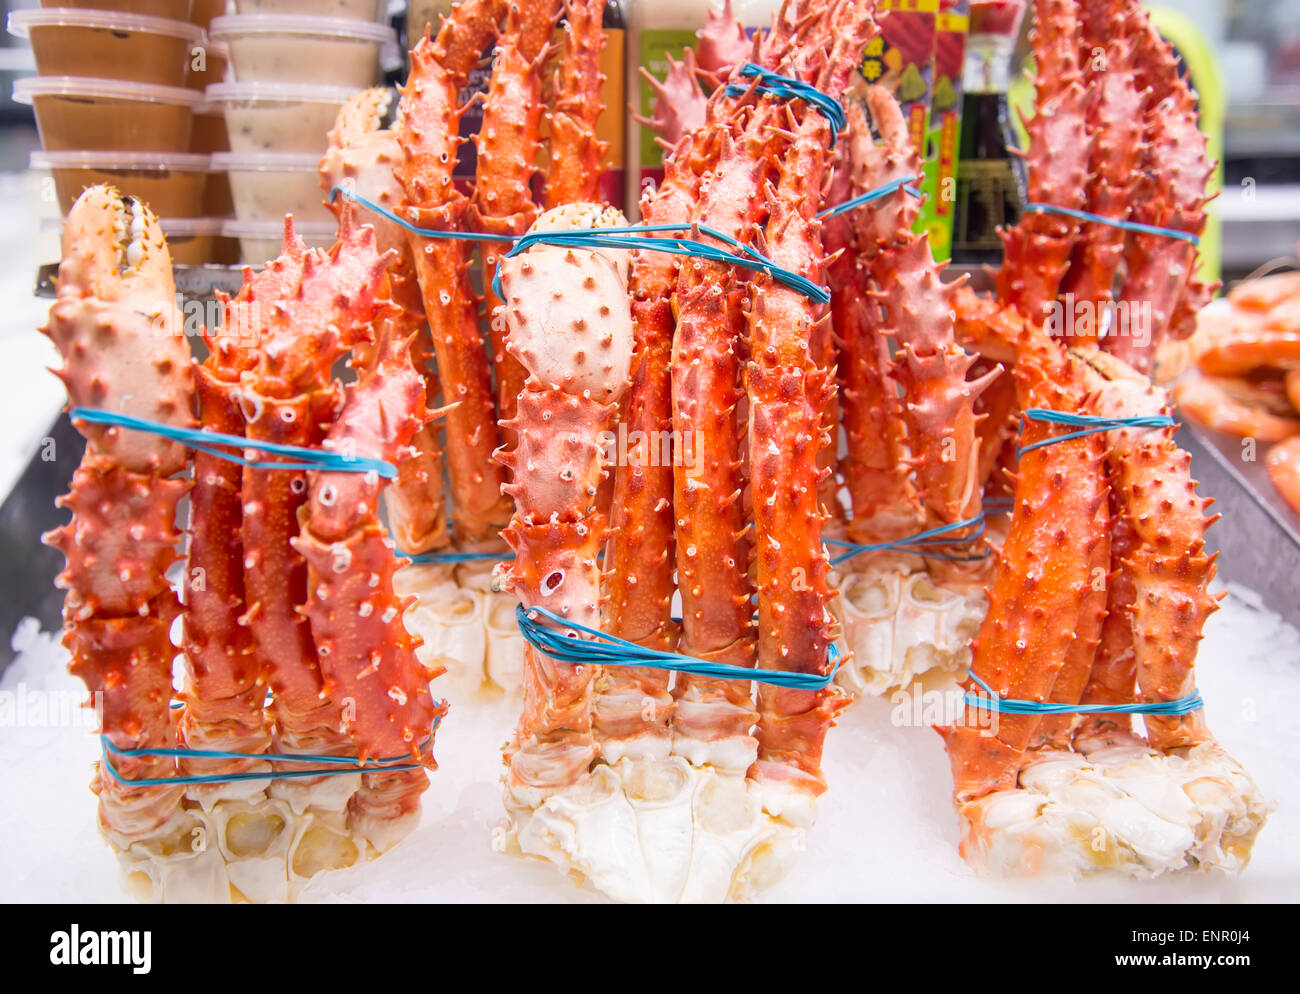 King crab legsr on the Sydney Fish Market. 52 tonnes of seafood are selling at auction on this market every day. Stock Photo